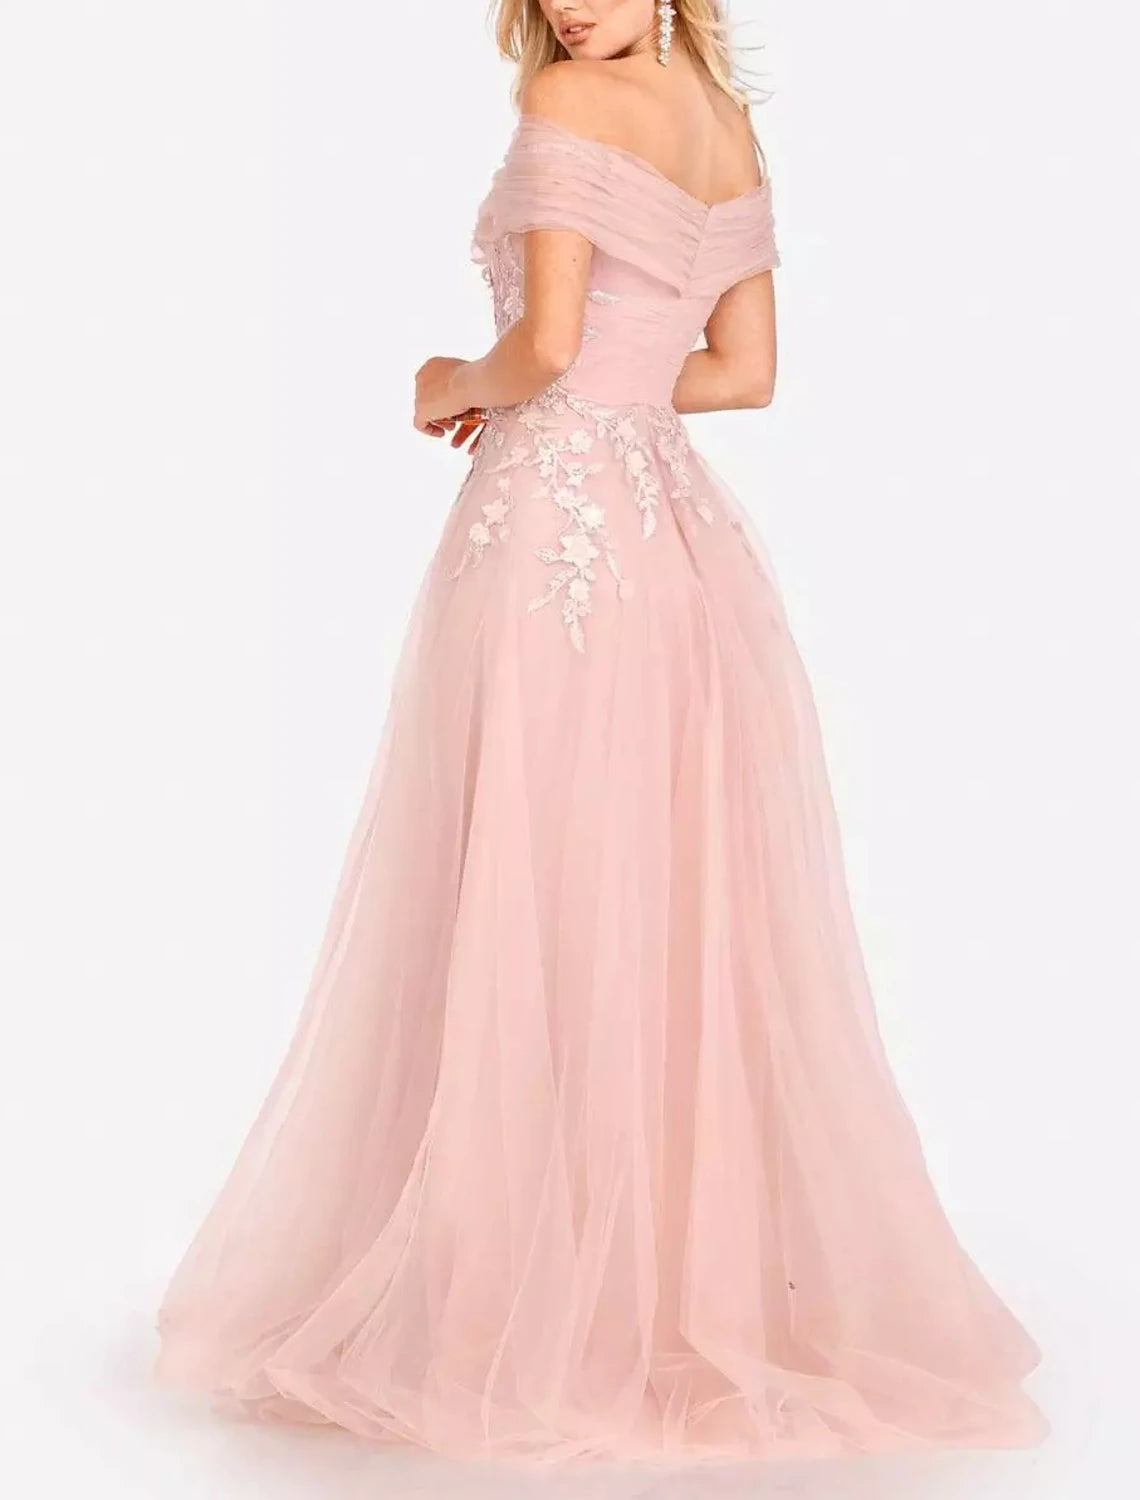 Ball Gown Evening Gown Elegant Dress Formal Pink Dress Floor Length Sleeveless Sweetheart Neck Tulle with Flower